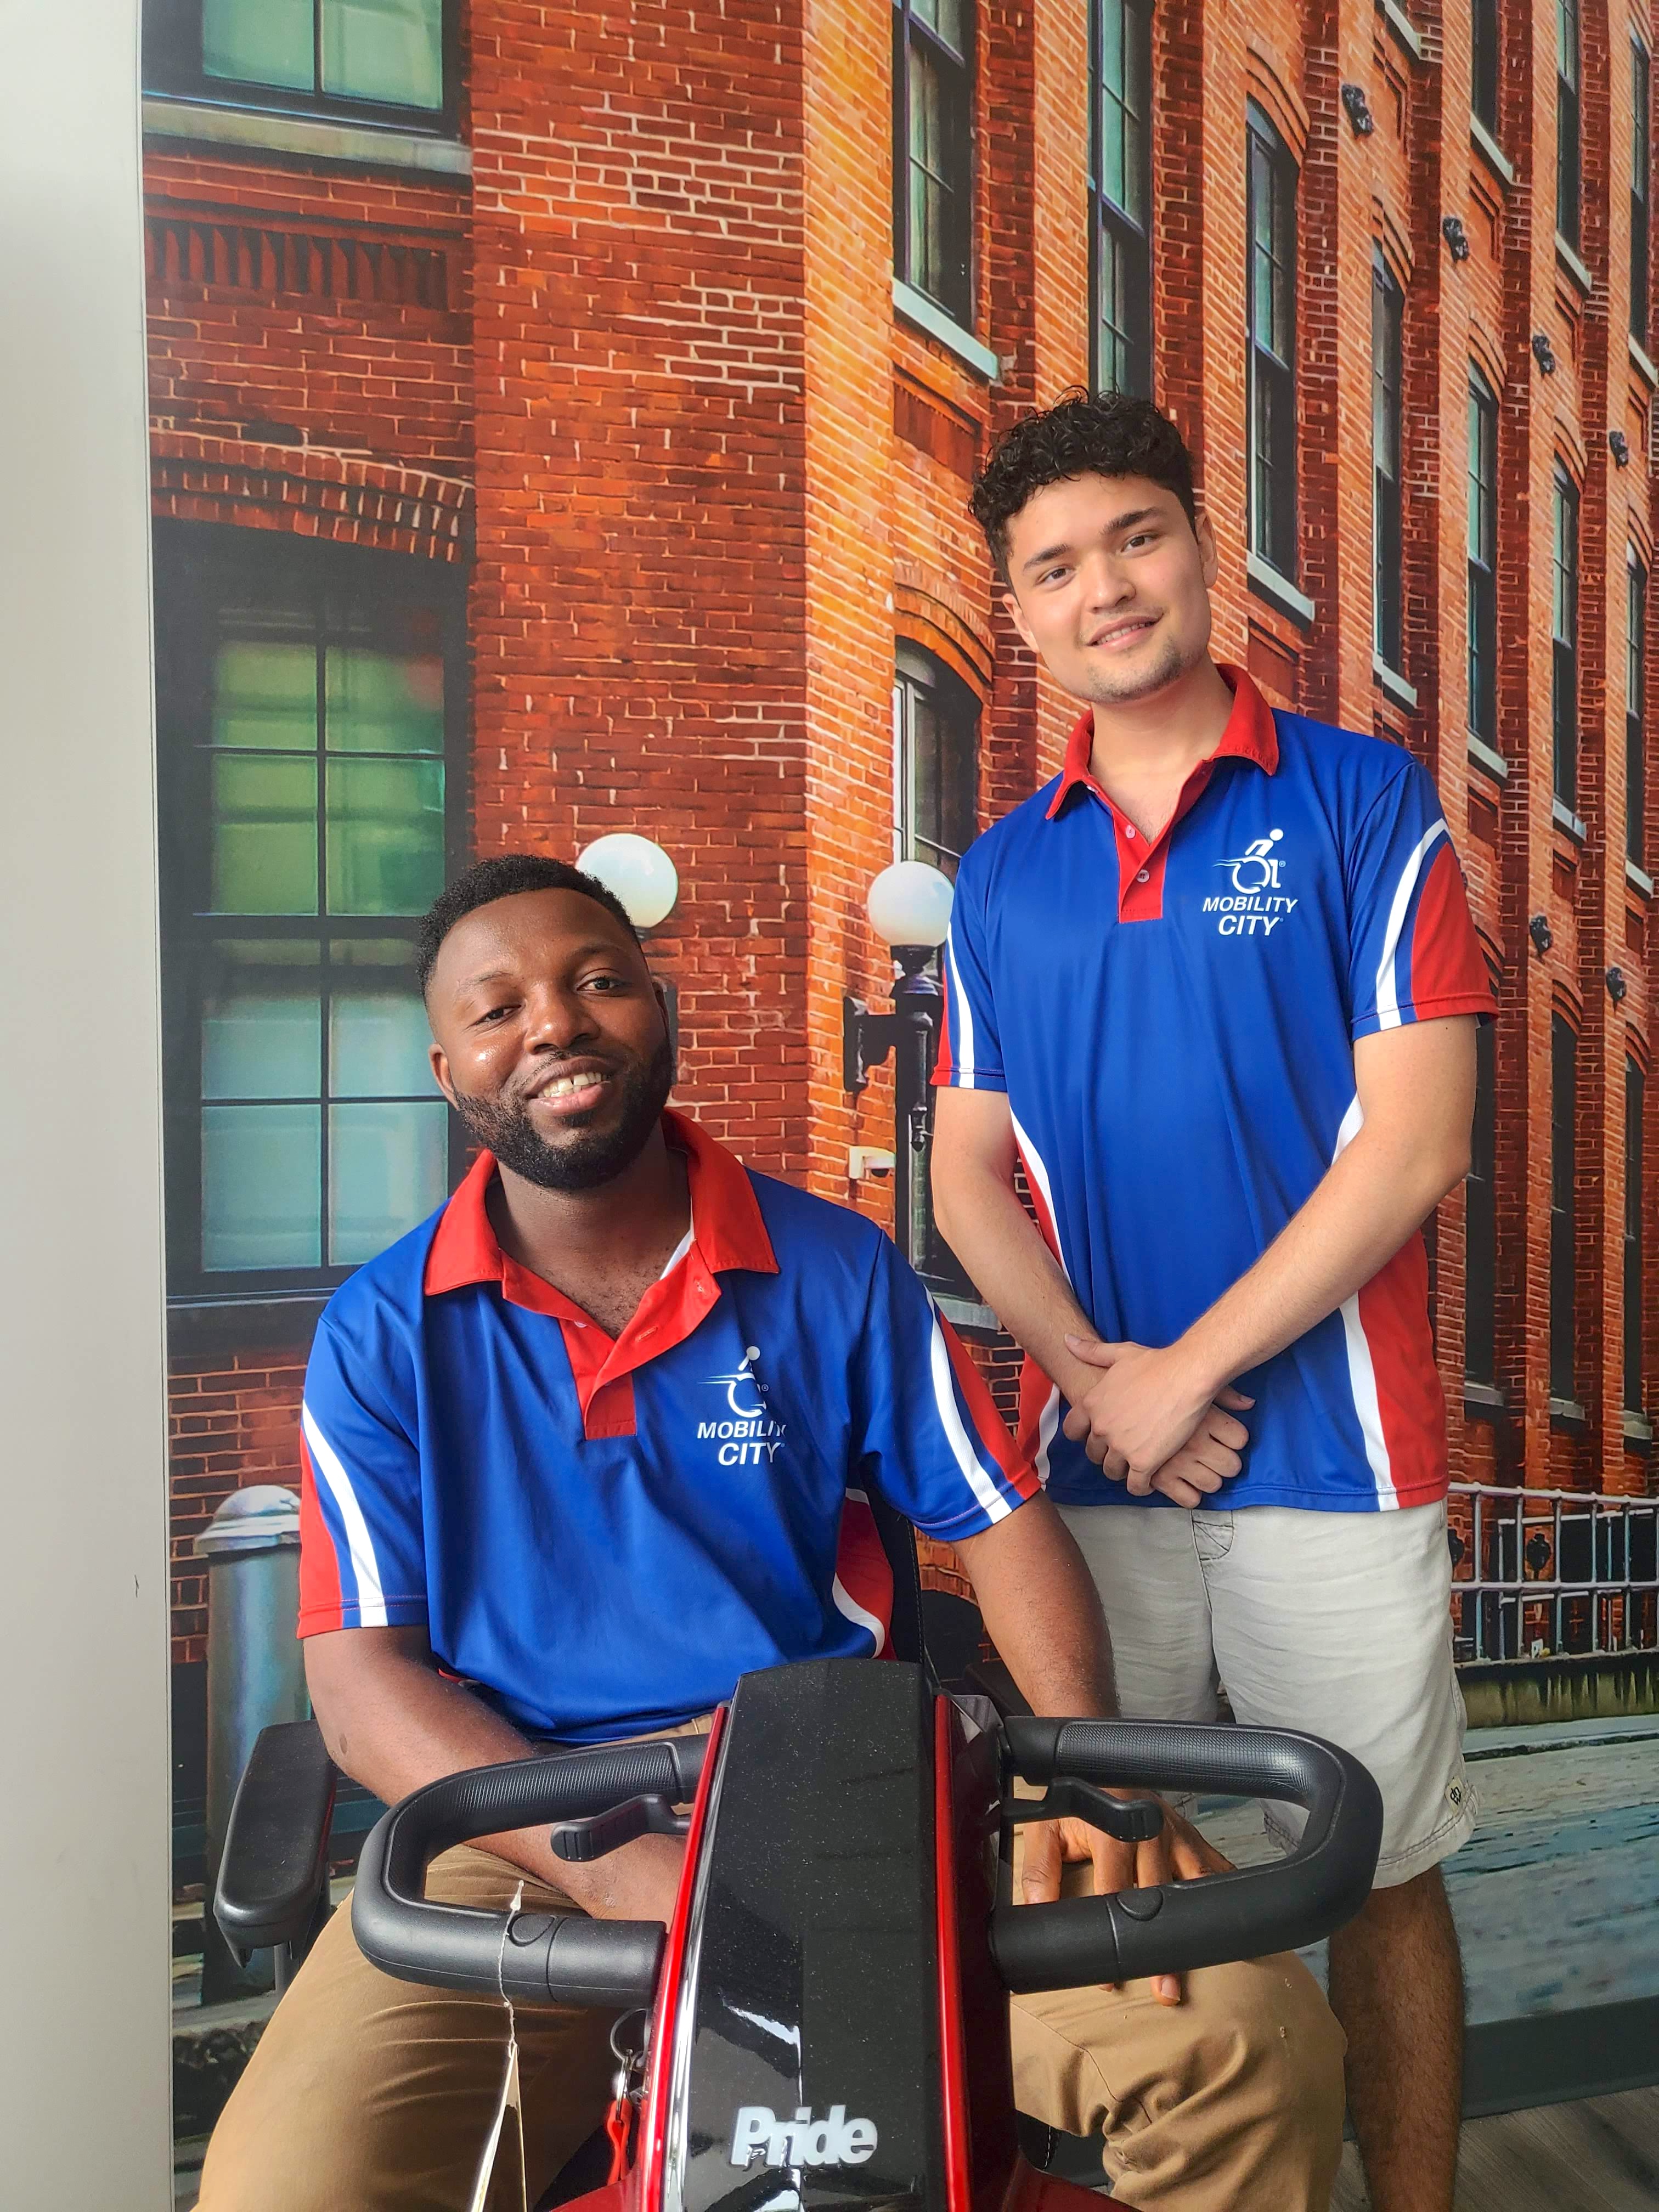 Photo of two Technicians from Mobility City of Westchester NY who will come to you for repairs, rentals, and sales.